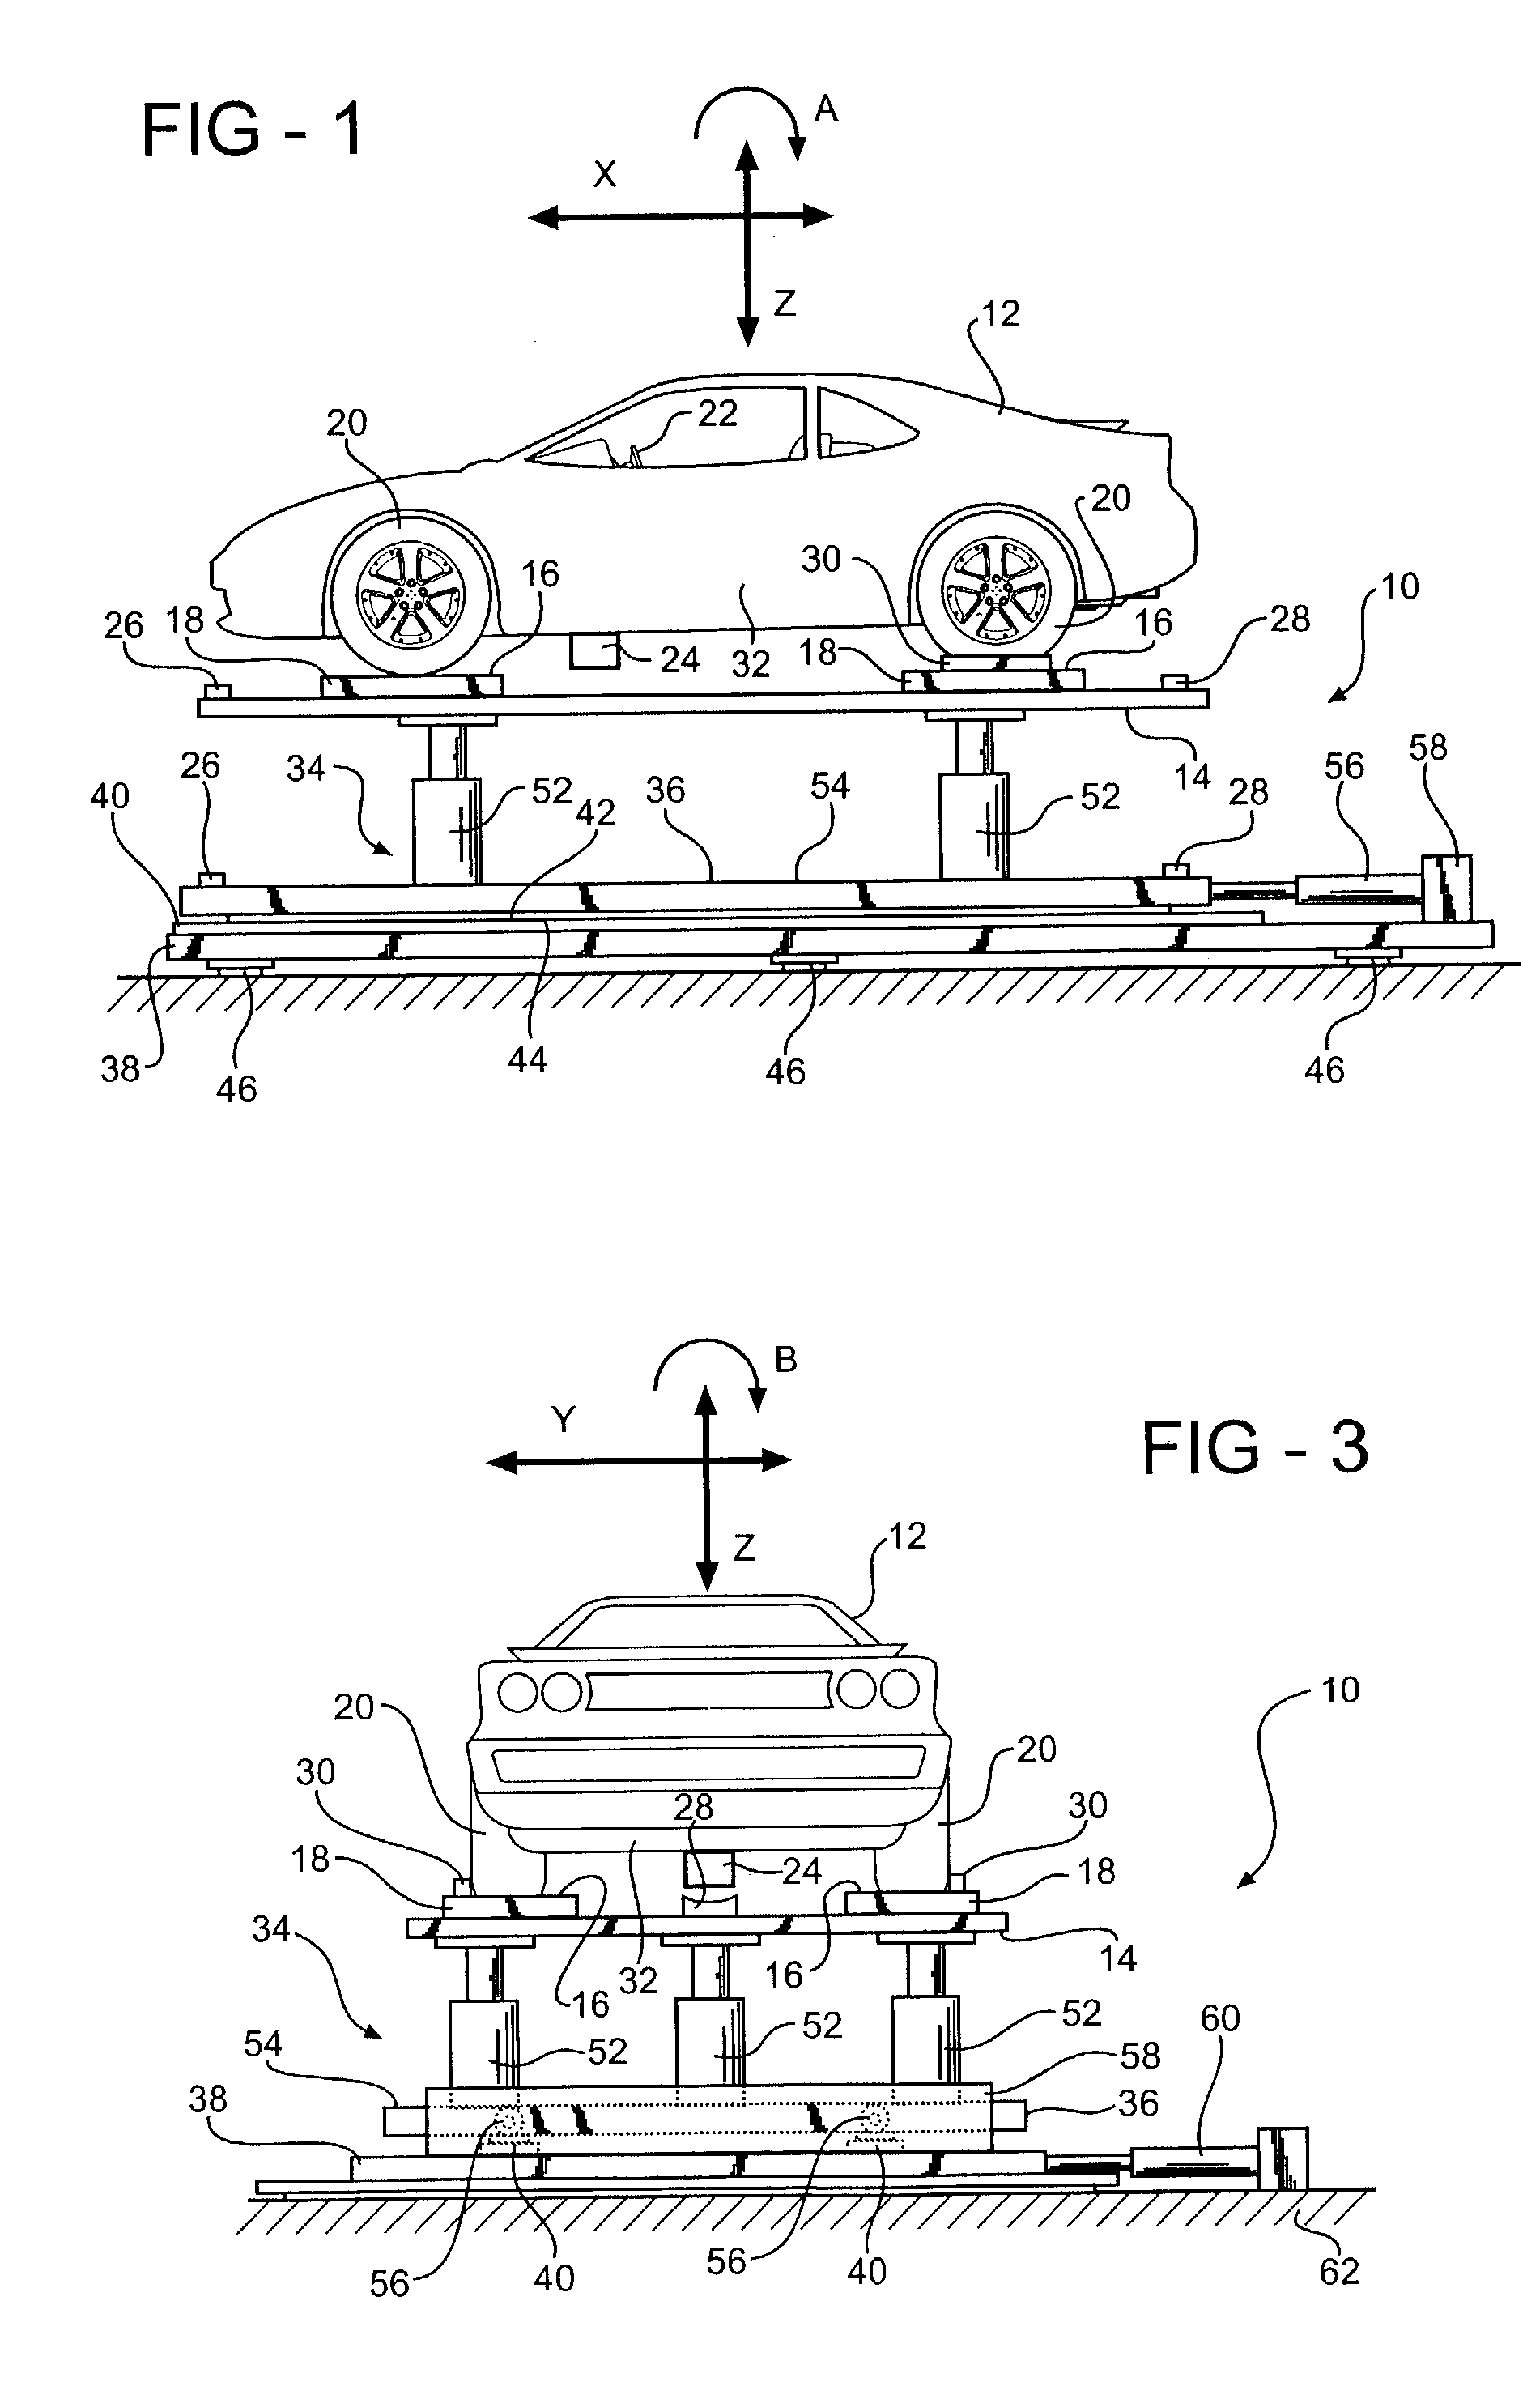 Vehicle testing apparatus for measuring a propensity of a vehicle to roll over